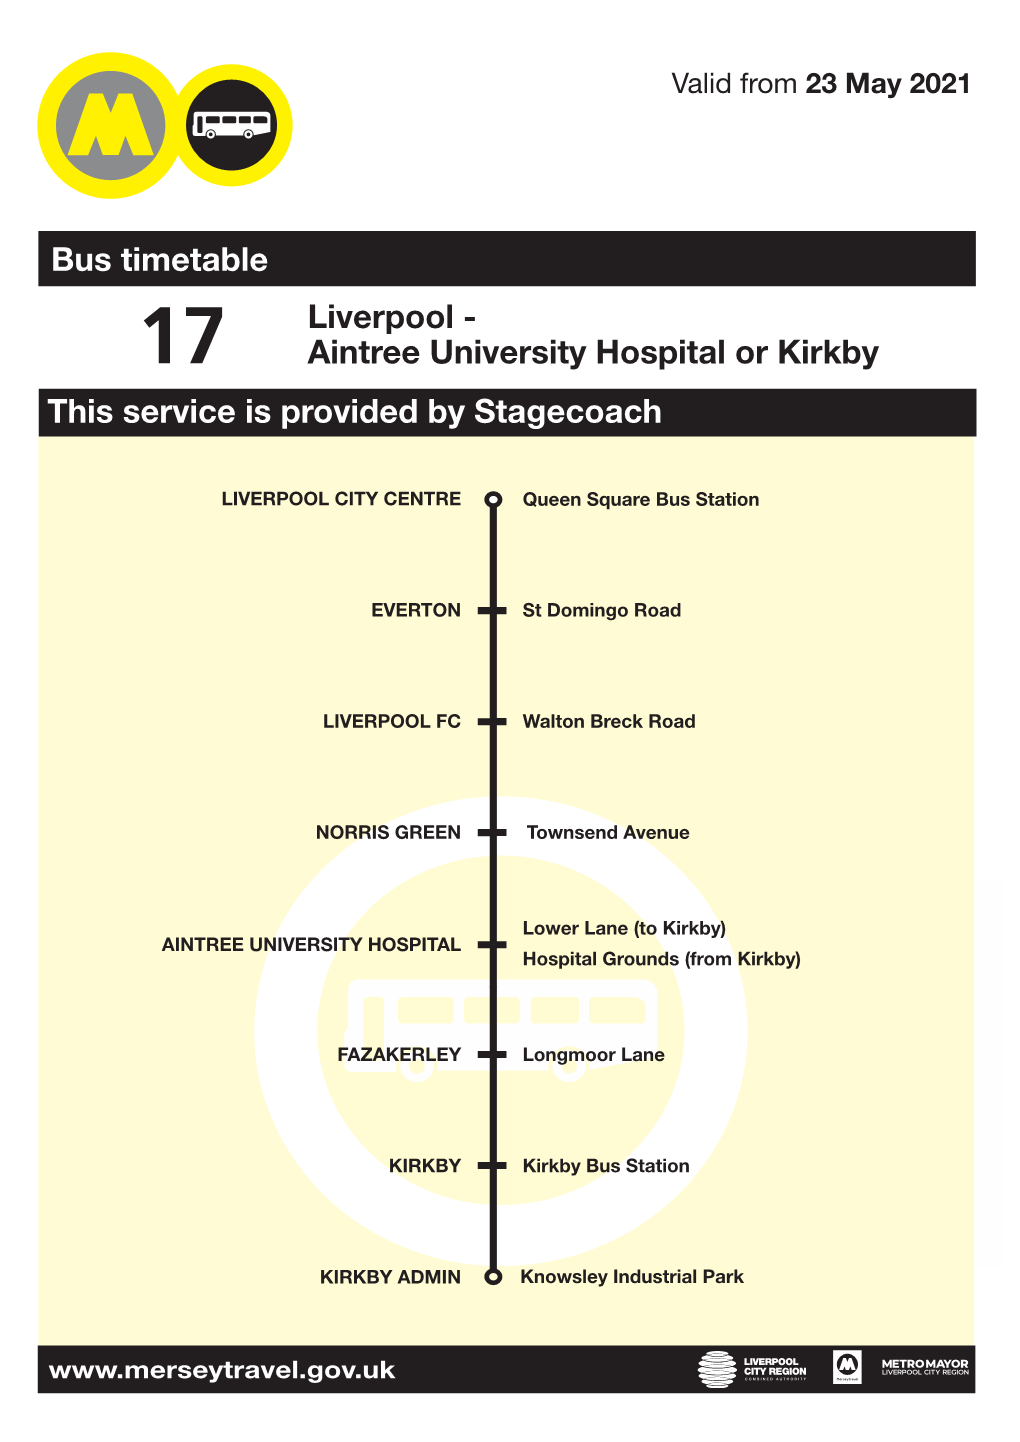 Bus Timetable This Service Is Provided by Stagecoach